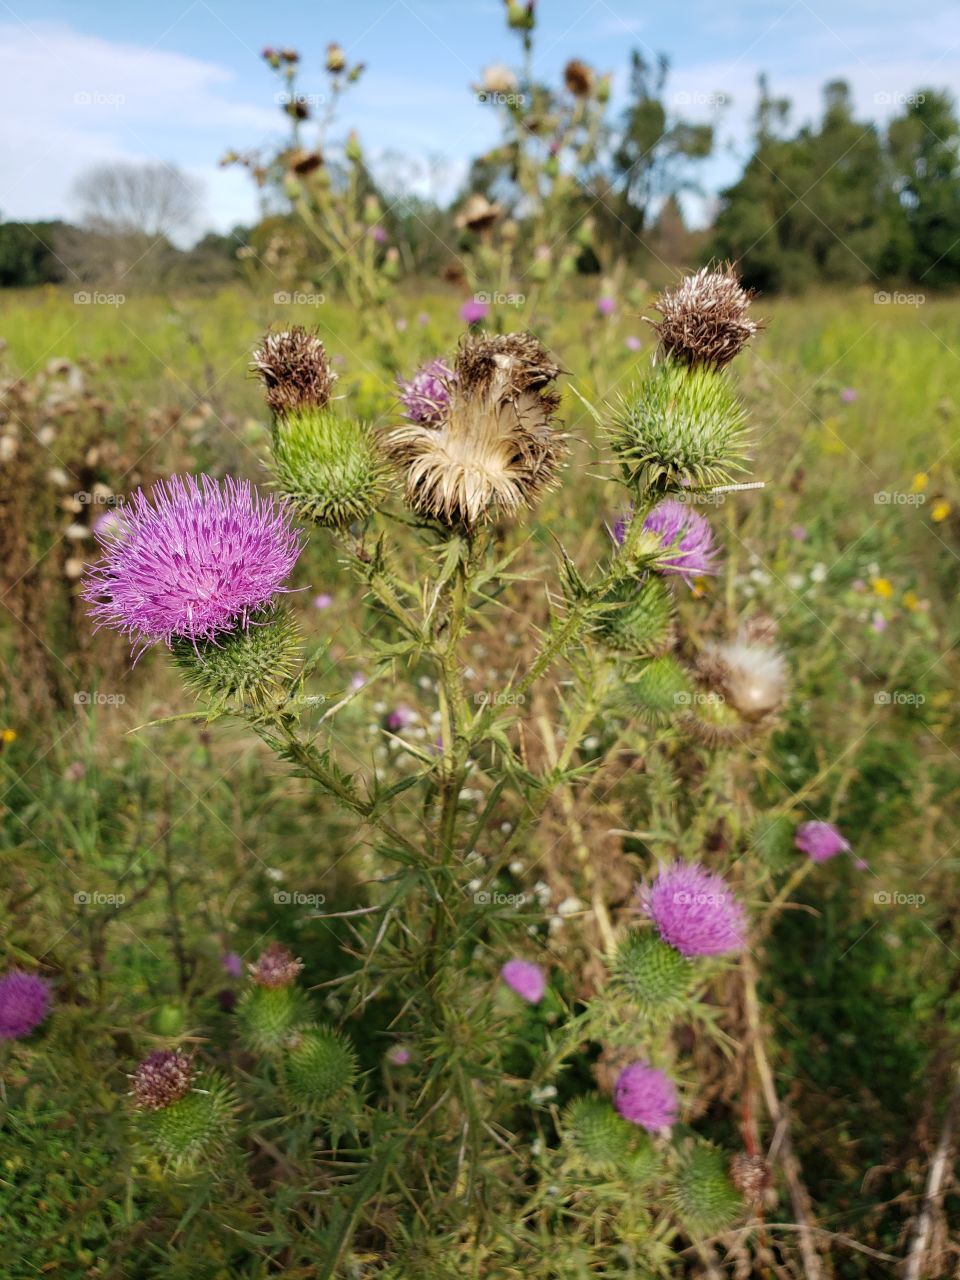 Thistle in bloom